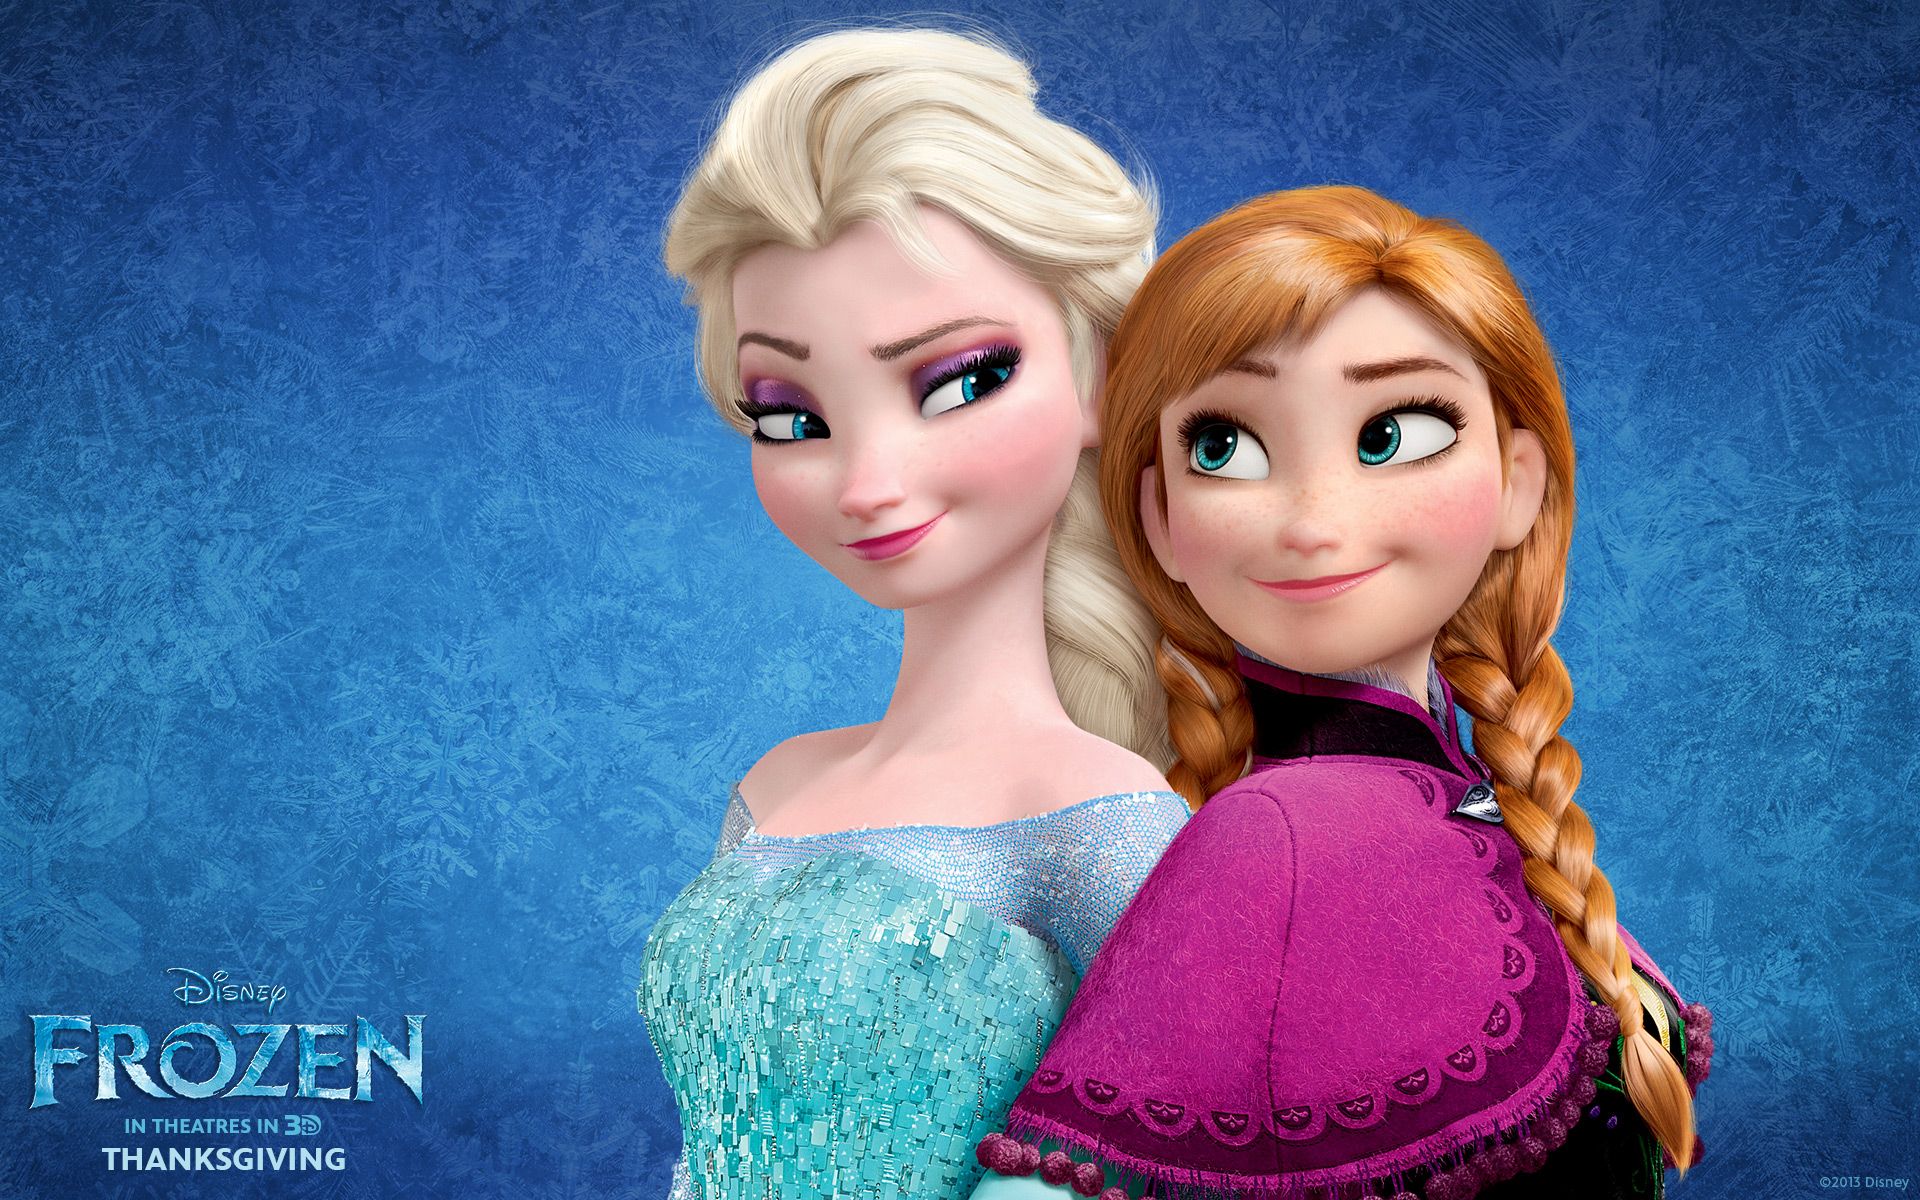 Frozen magic unveiled: How Disney rewrote the princess rulebook
